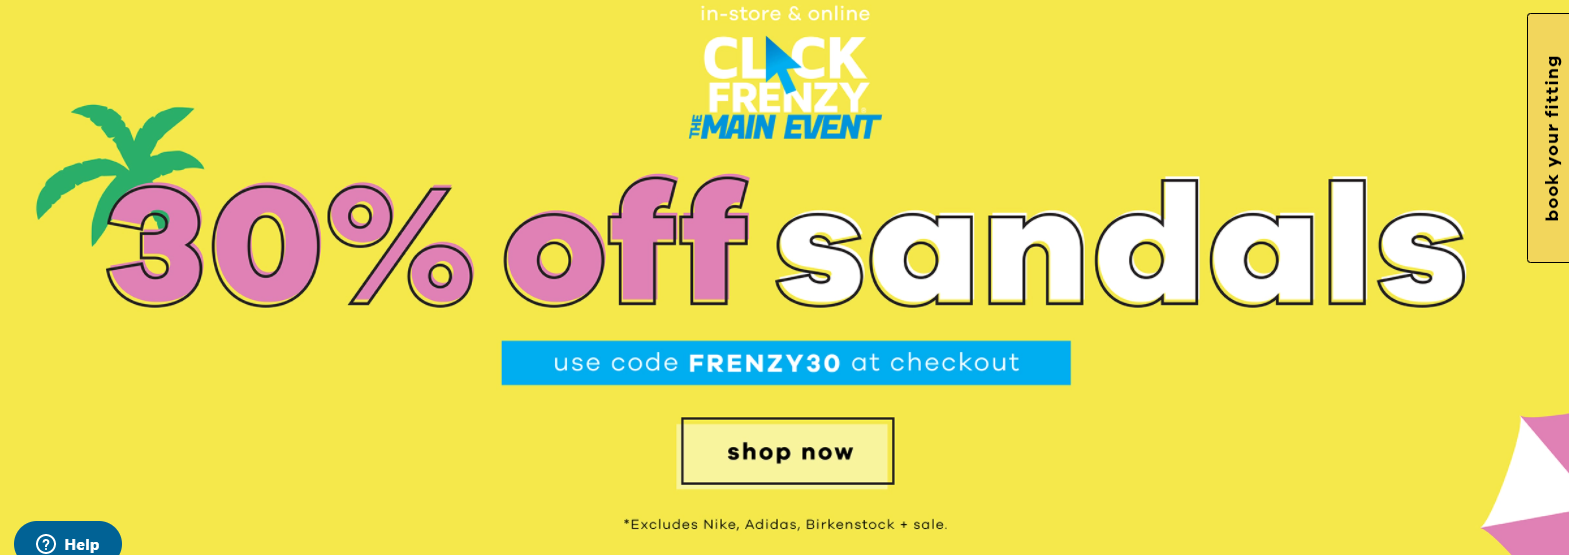 Click Frenzy sale extra 30% OFF on sandals with discount code including Online exclusives